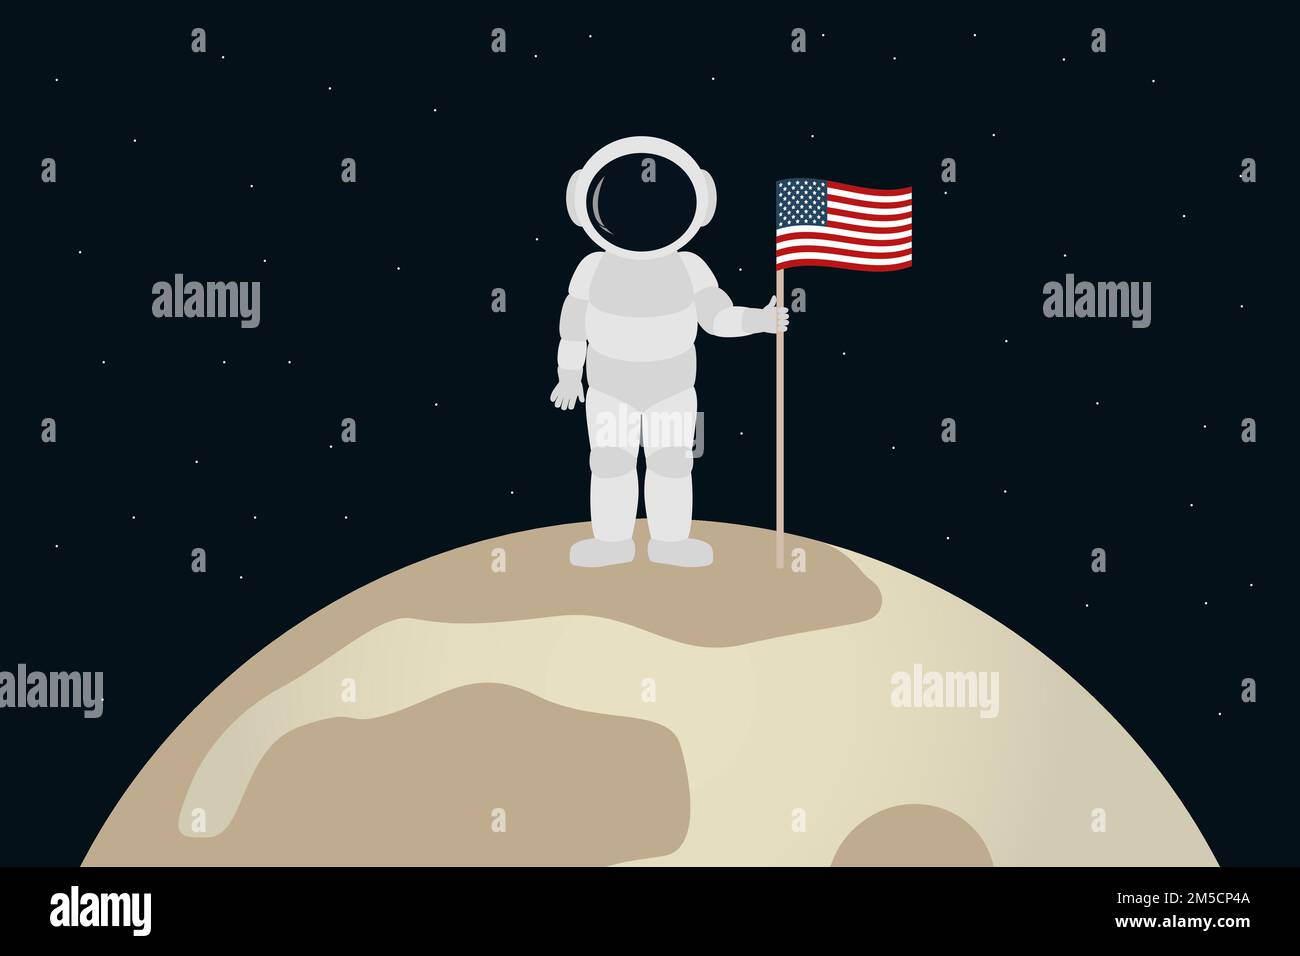 American cosmonaut stand on moon and hold flag of USA. Cartoon style. Vector illustration. Stock Vector